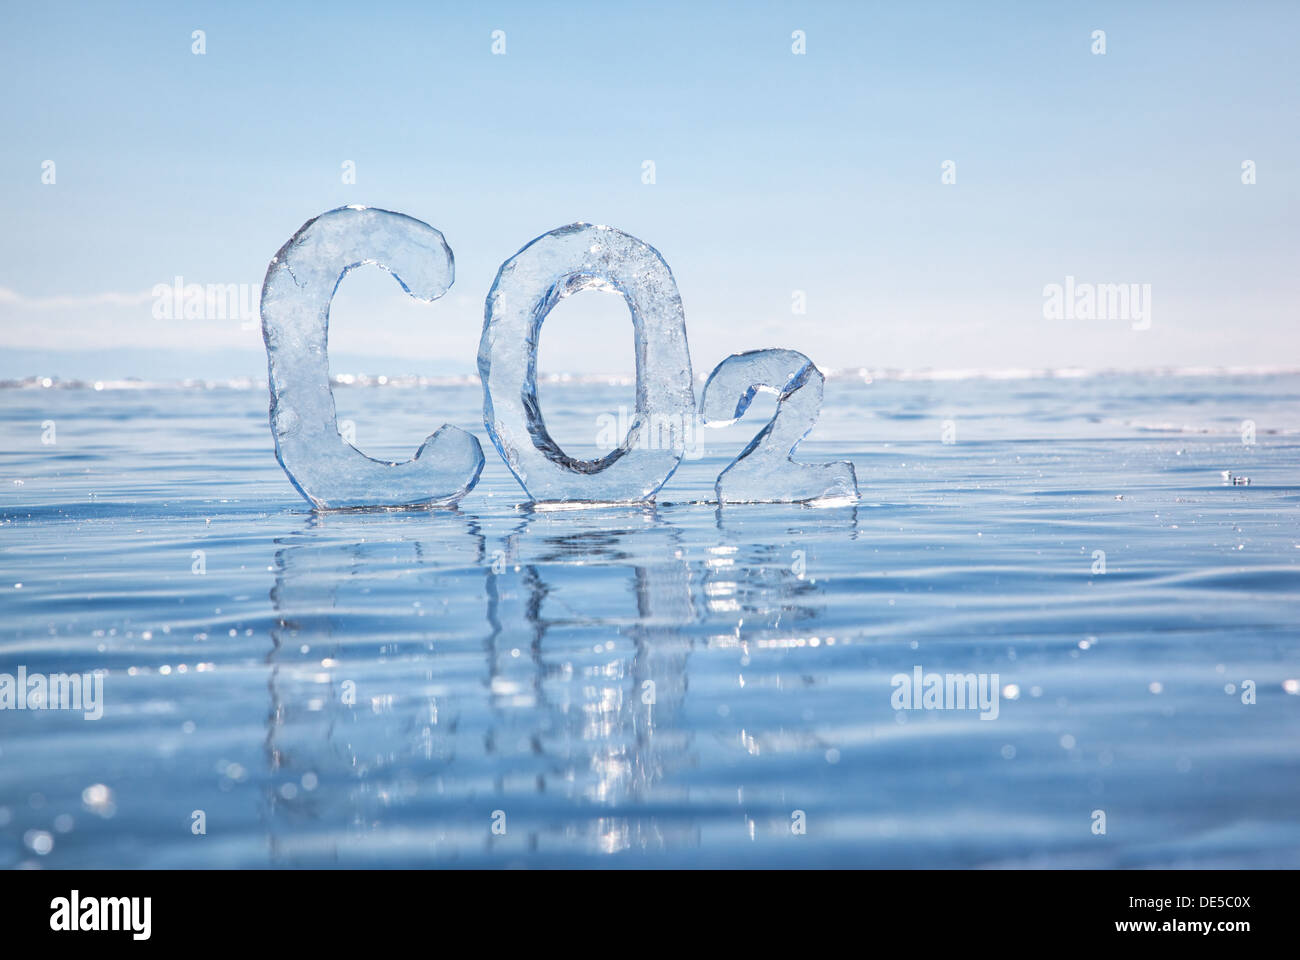 Chemical formula of greenhouse gas carbon dioxide CO2 made from ice on winter frozen lake Baikal under blue sky  Stock Photo